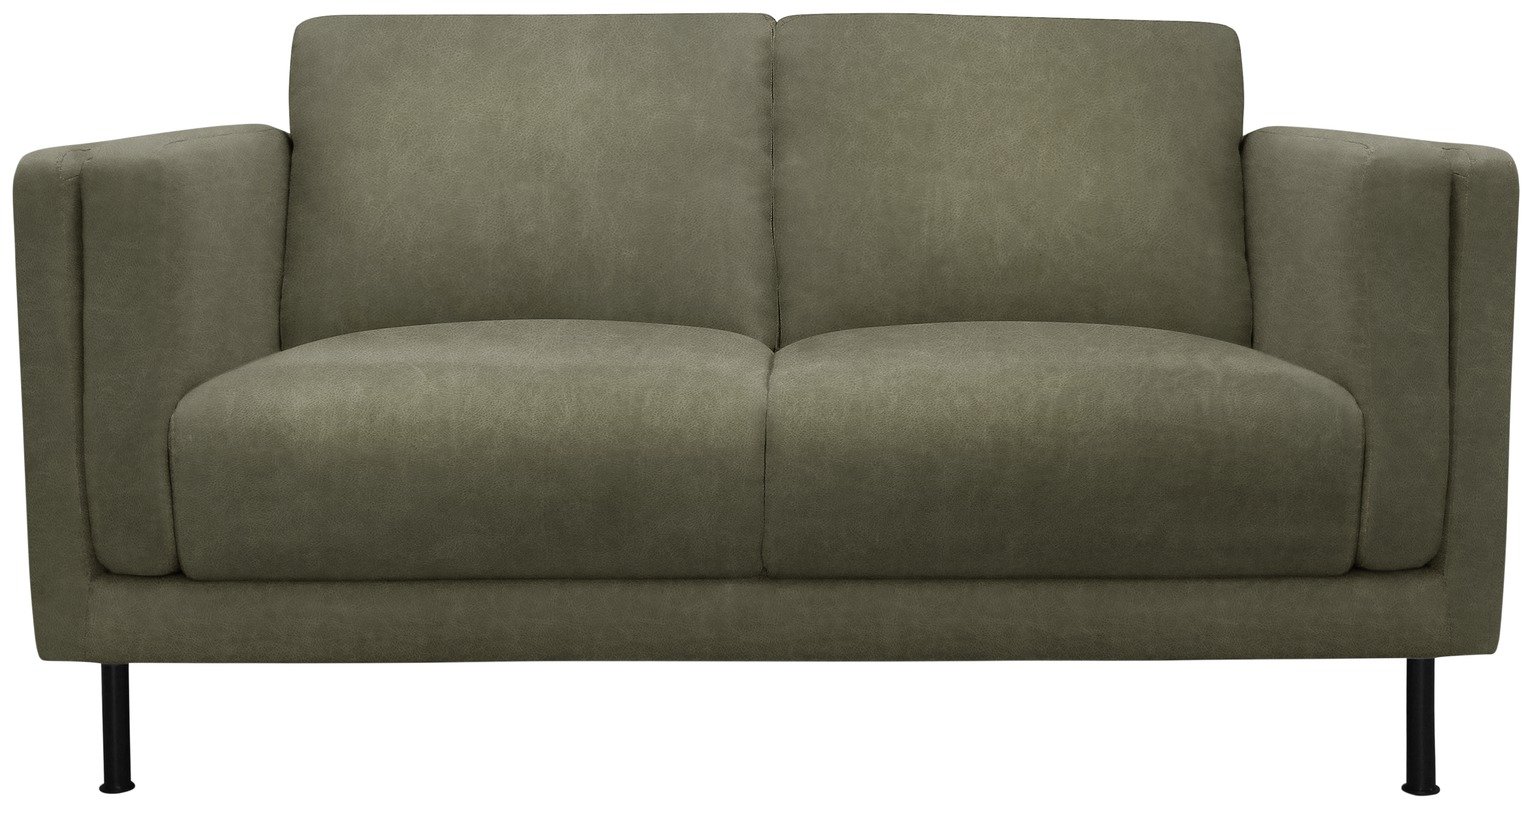 Argos Home Hugo 2 Seater Faux Leather Sofa Review